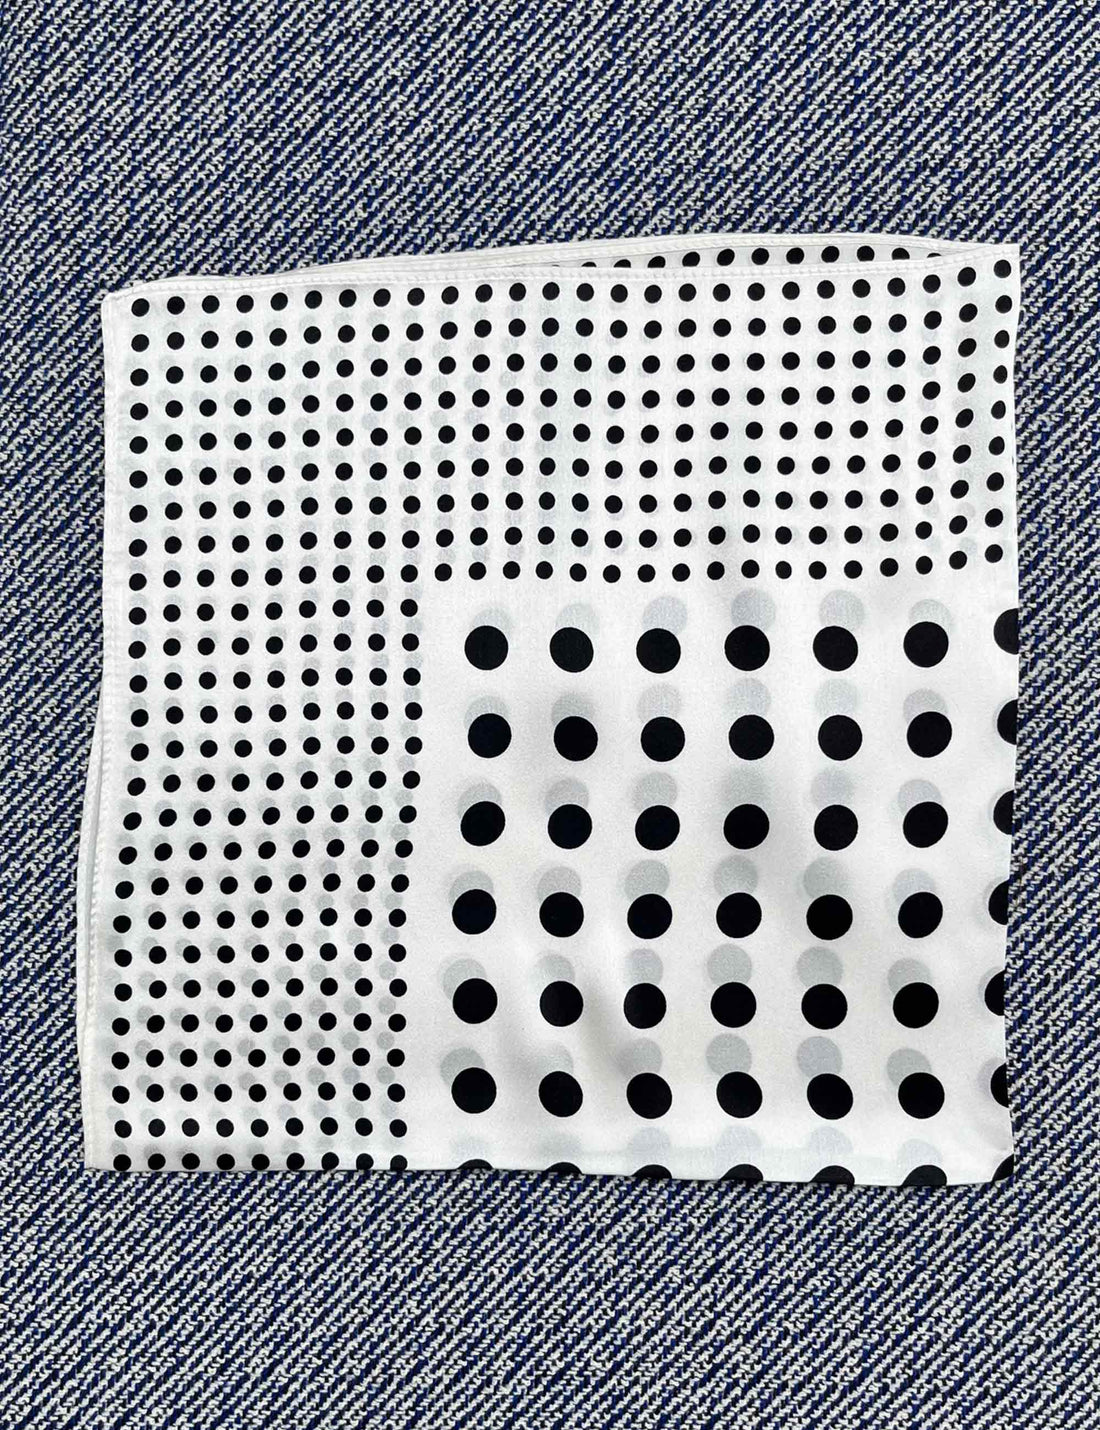 Silk scarf off white two size black dots